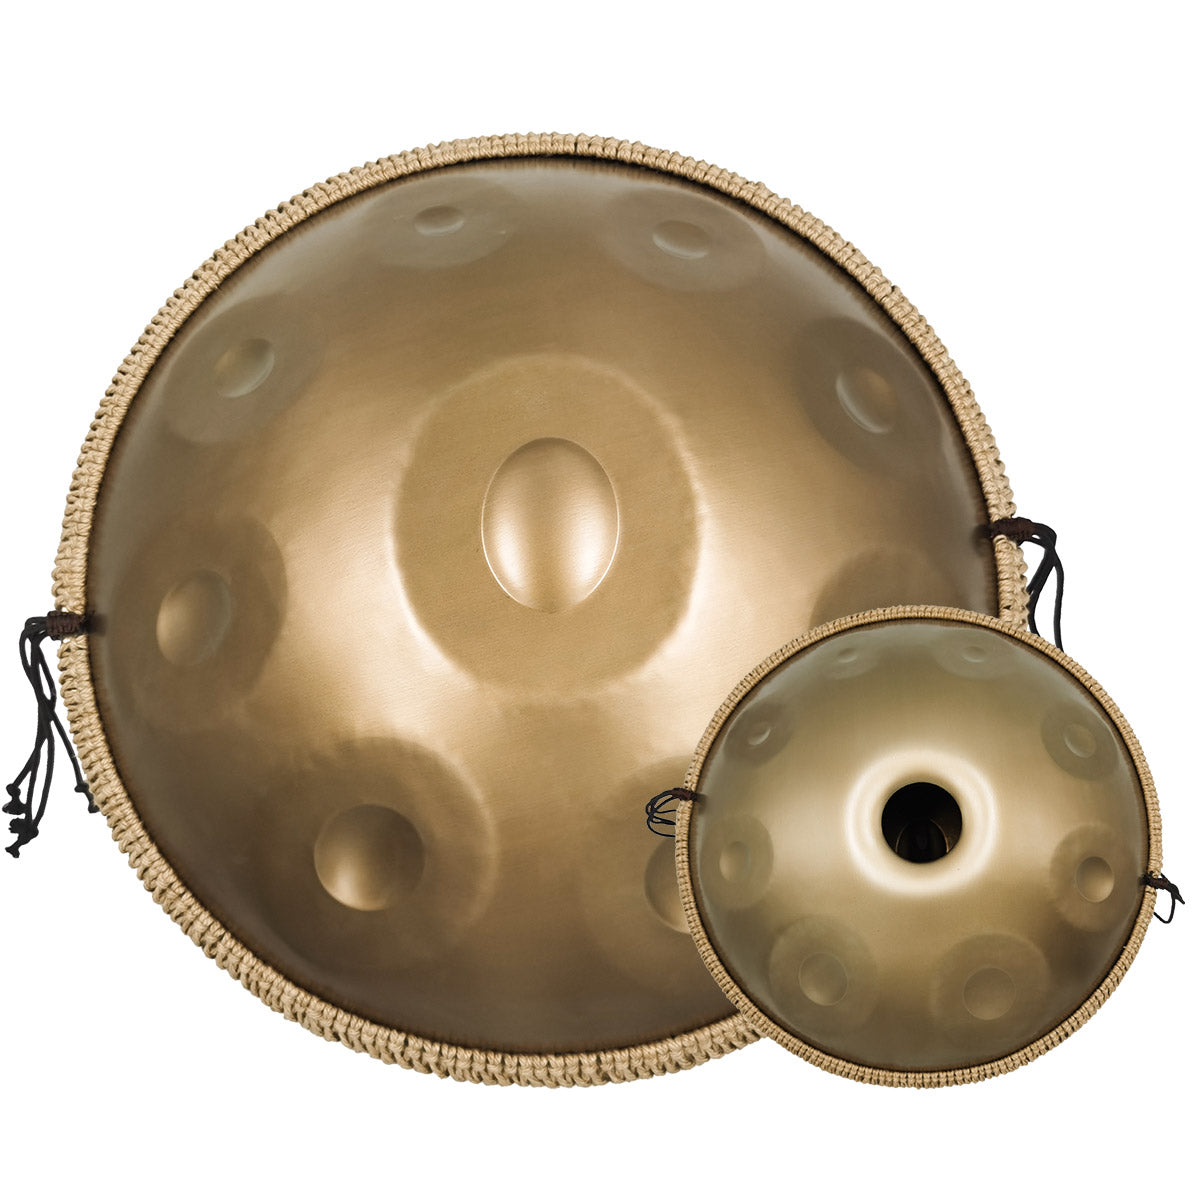 Hang Drum and Handpan Comparison - Many different scales and makers 